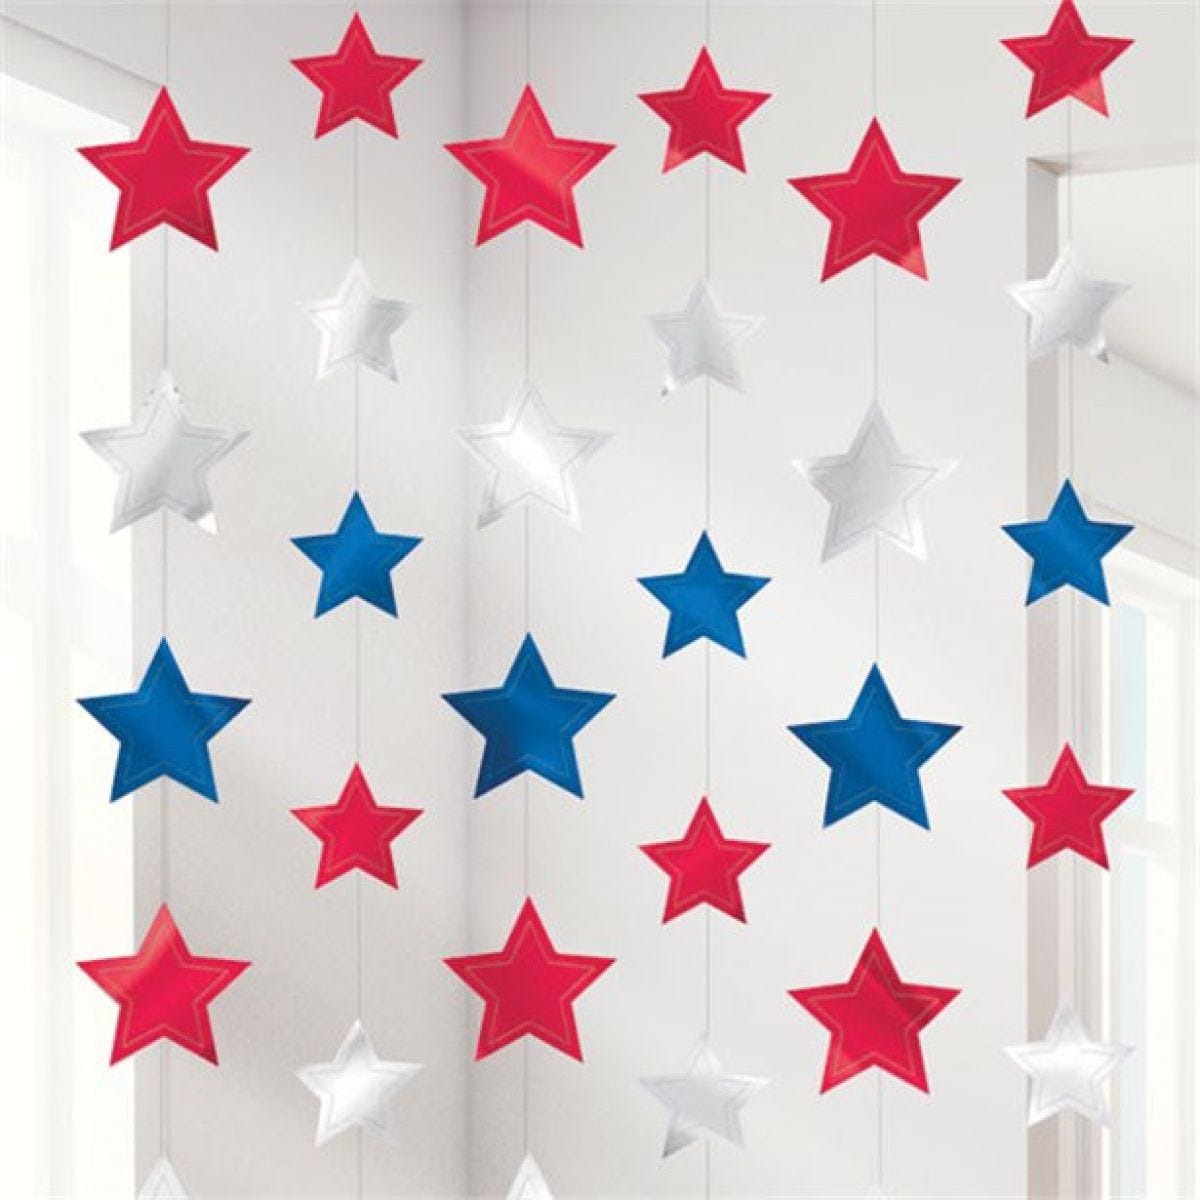 Red, Silver & Blue Star Hanging Strings Decorations - 2.1m (6pk)